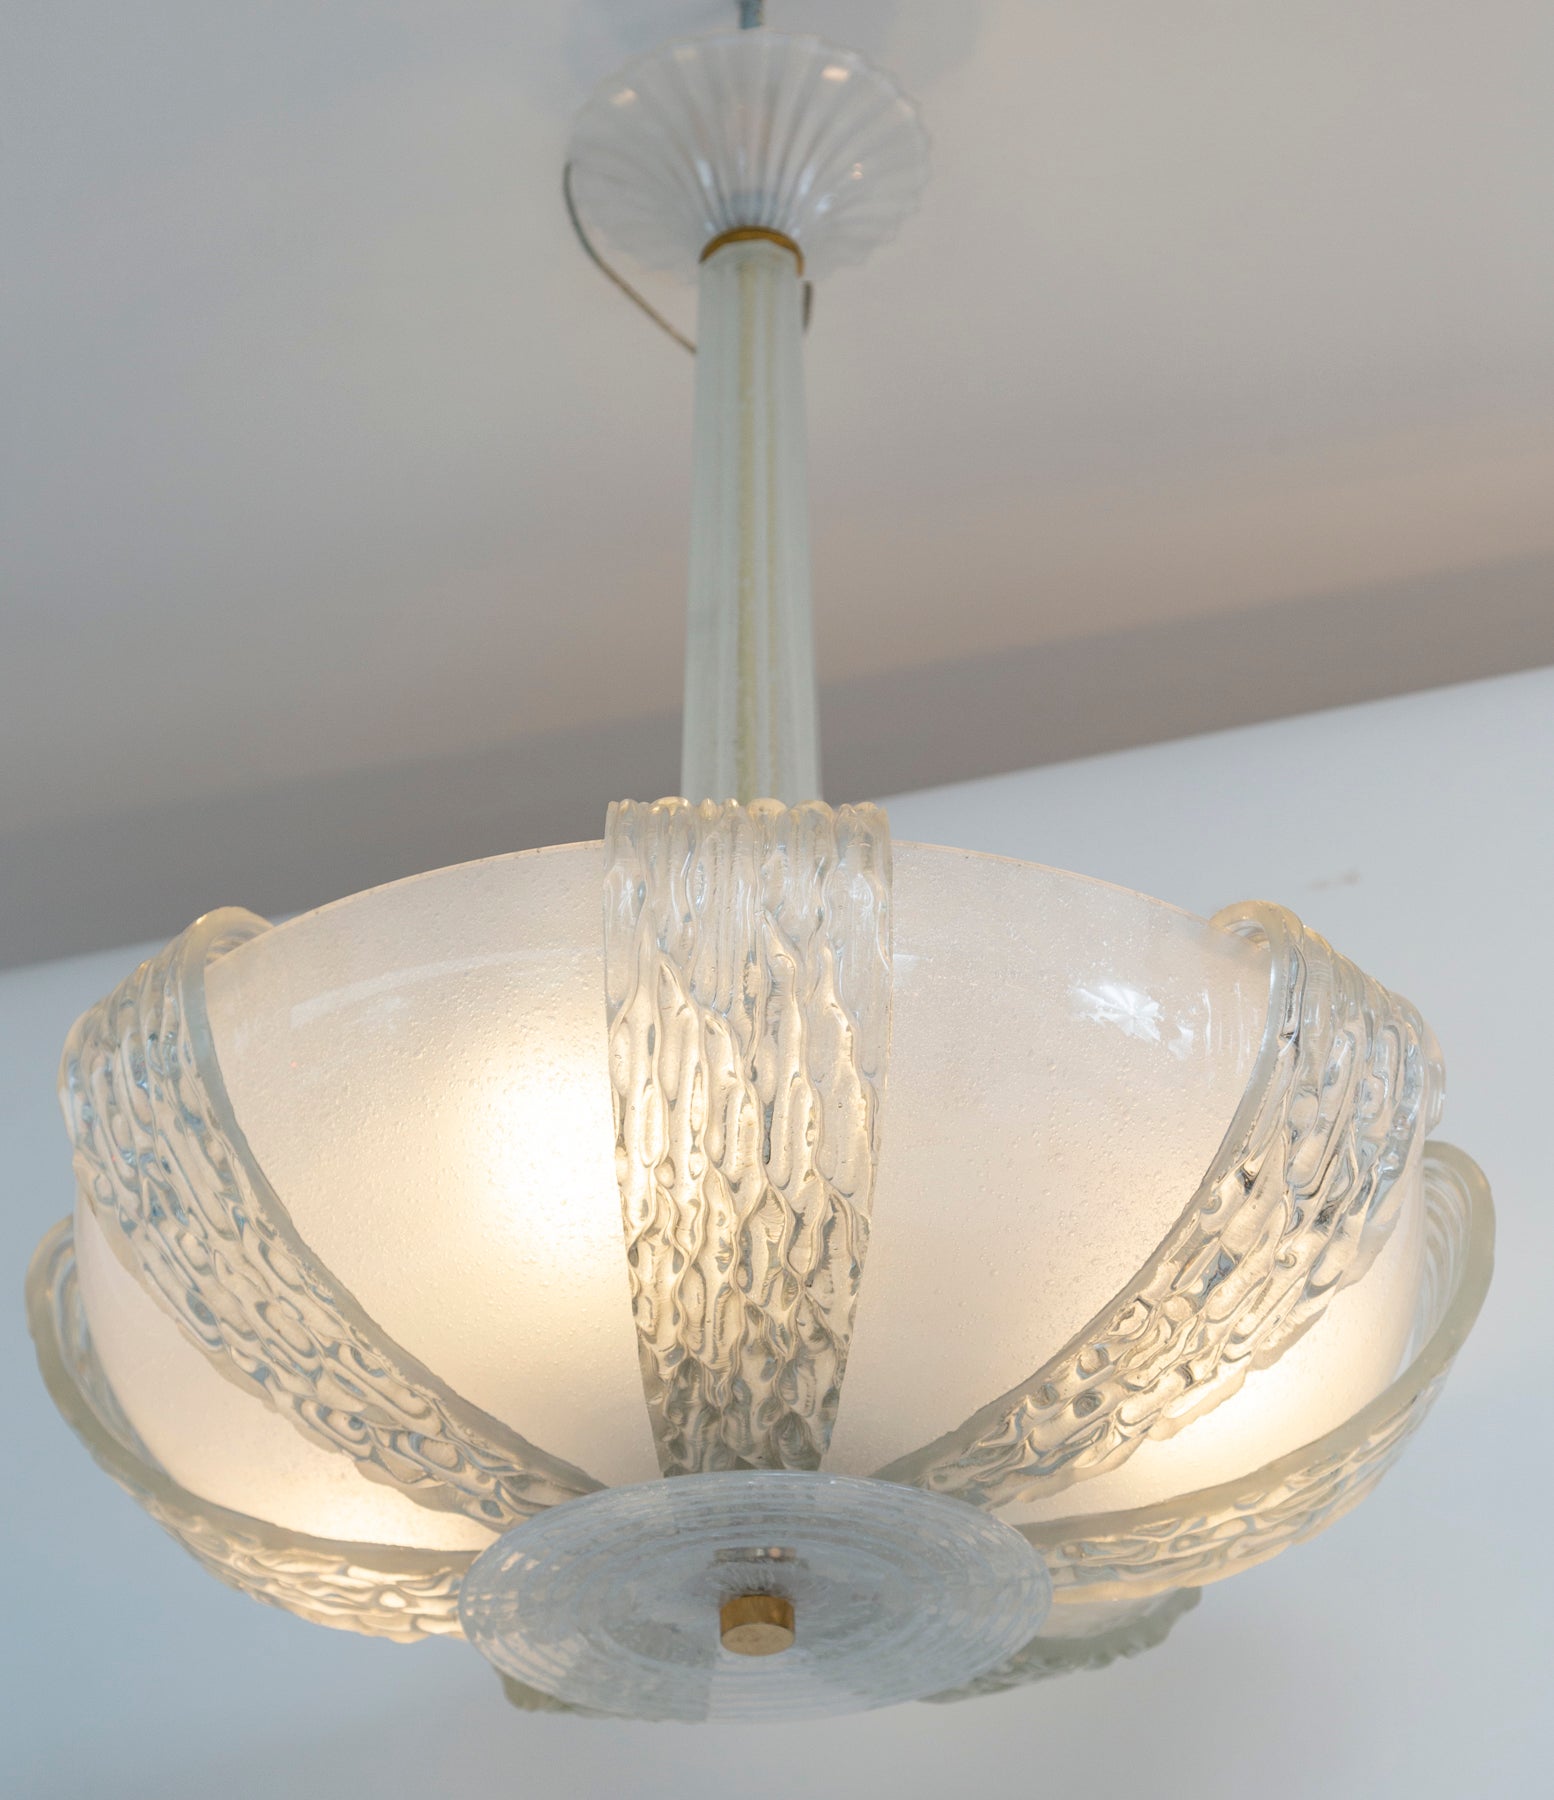 Vintage Venini  dome shaped ceiling fixture upheld by a lovely graduated center stem and canopy blown in the pulegoso technique (controlled bubbles that created a shimmery illumination)  and layered then layered with icy textured sleeves and thin